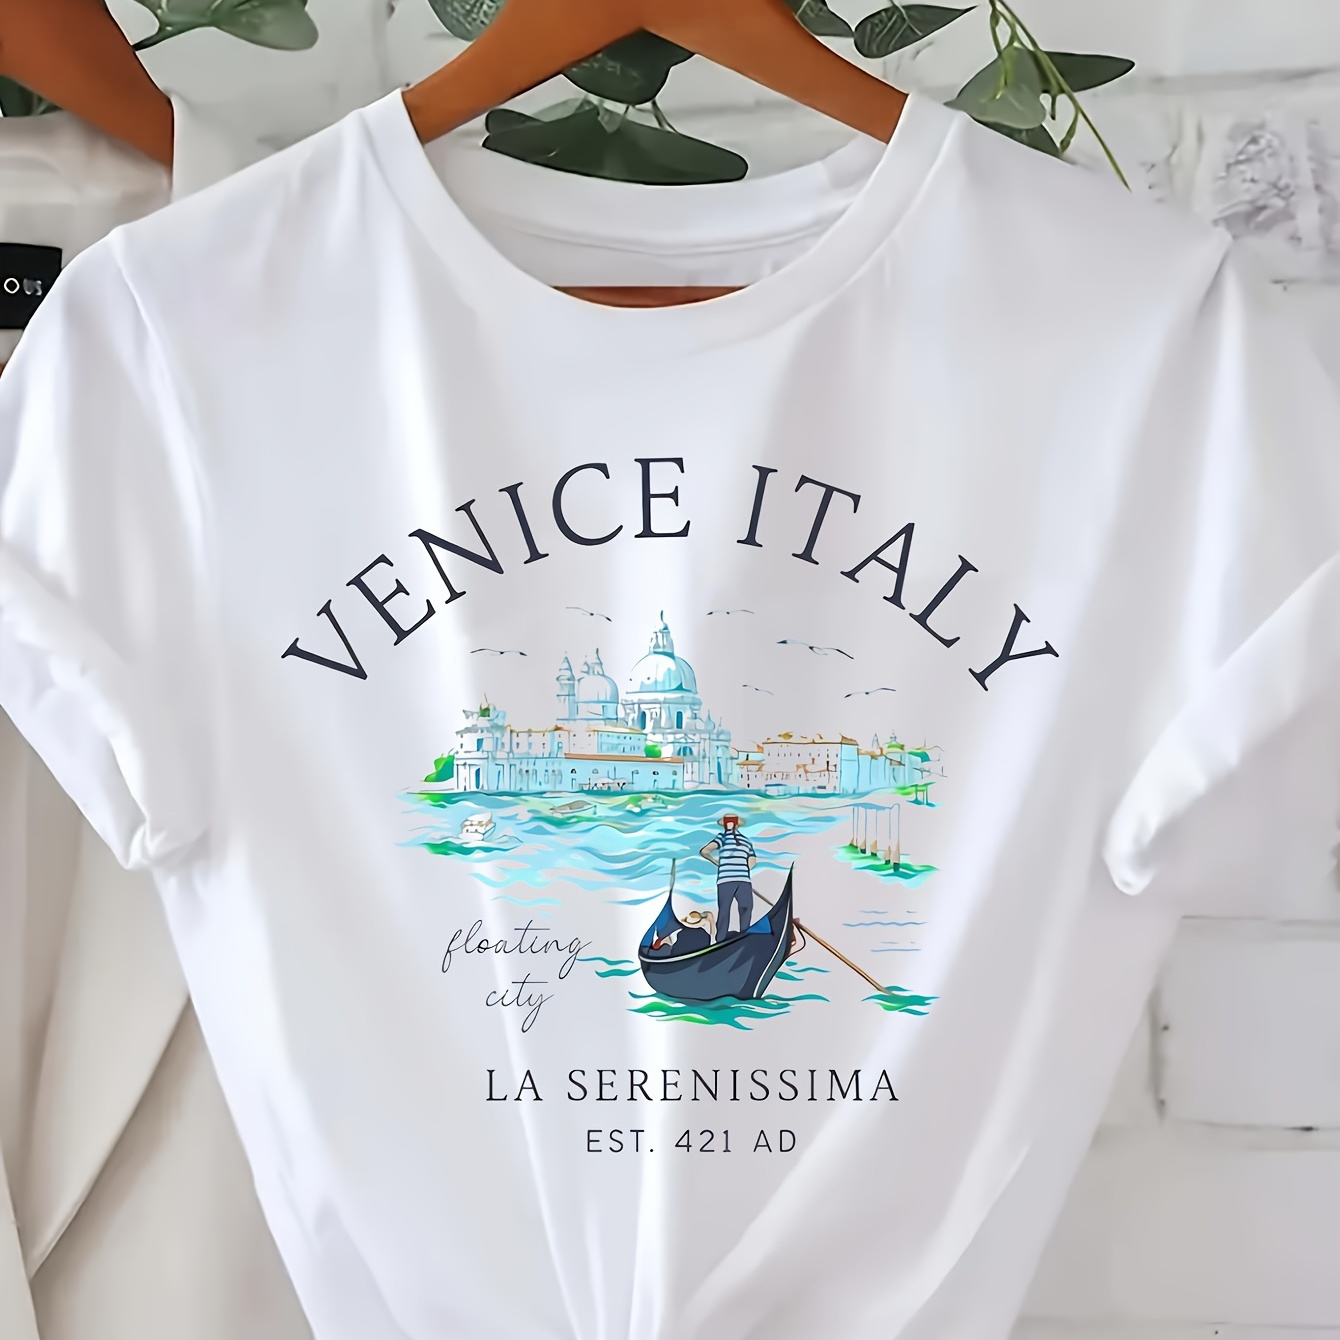 

Italy Print T-shirt, Short Sleeve Crew Neck Casual Top For Summer & Spring, Women's Clothing